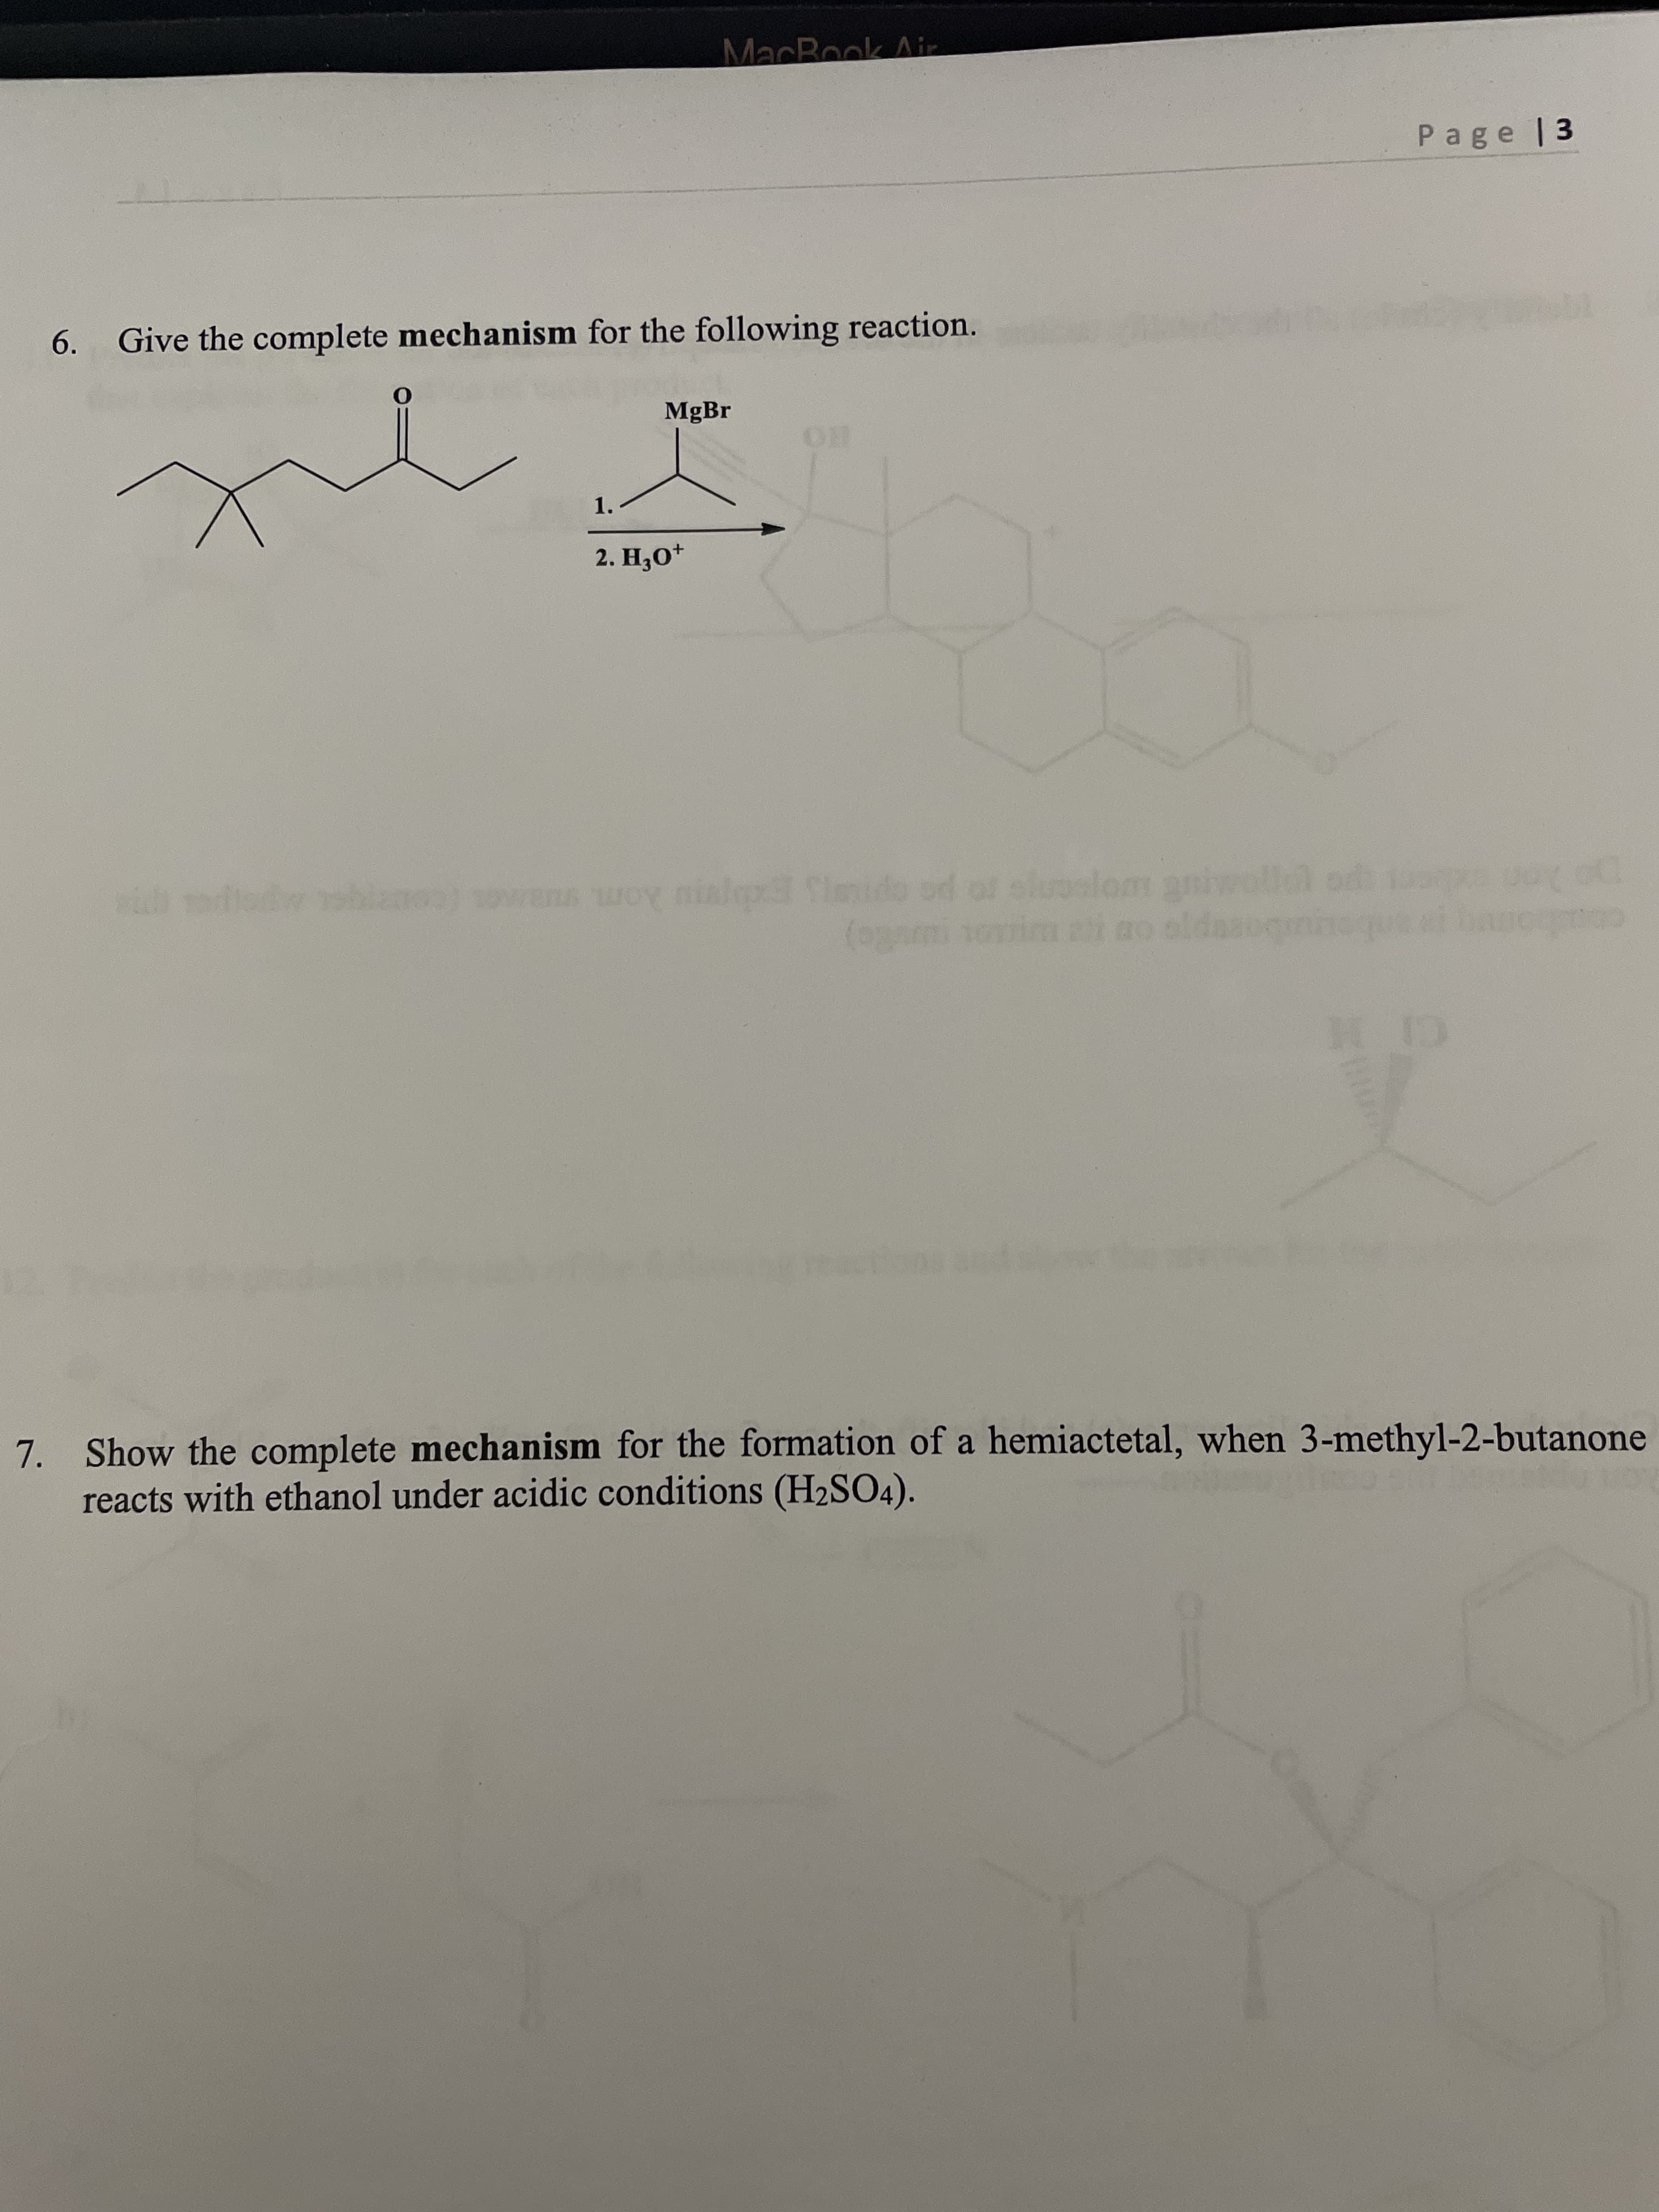 MacBook Air
Page |3
6.
Give the complete mechanism for the following reaction.
MgBr
1.
2. H,0*
od of sluuslom anie
b Aom ua (co
(ogami 1omim ai ao sldasog
cobo
7. Show the complete mechanism for the formation of a hemiactetal, when 3-methyl-2-butanone
reacts with ethanol under acidic conditions (H2SO4).
